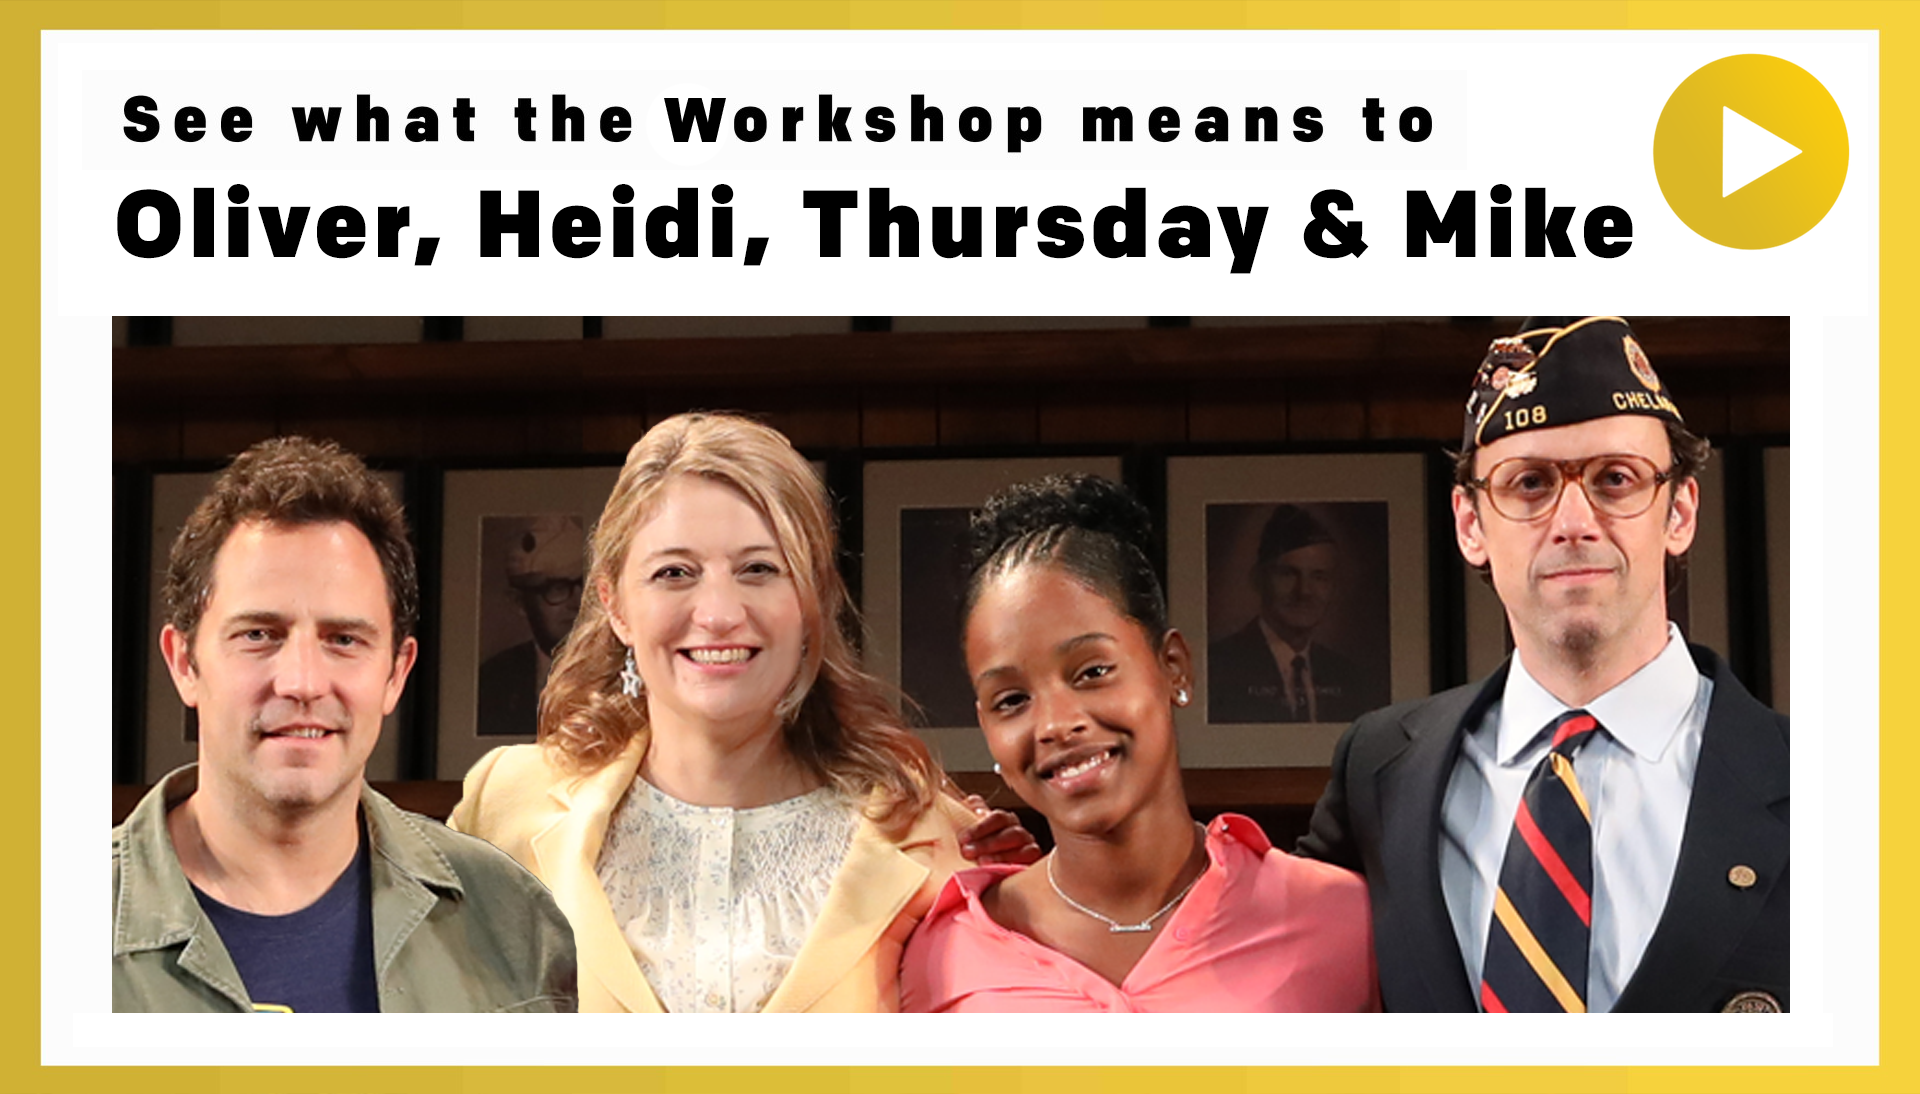 See what the Workshop means to Oliver, Heidi, Thursday & Mike